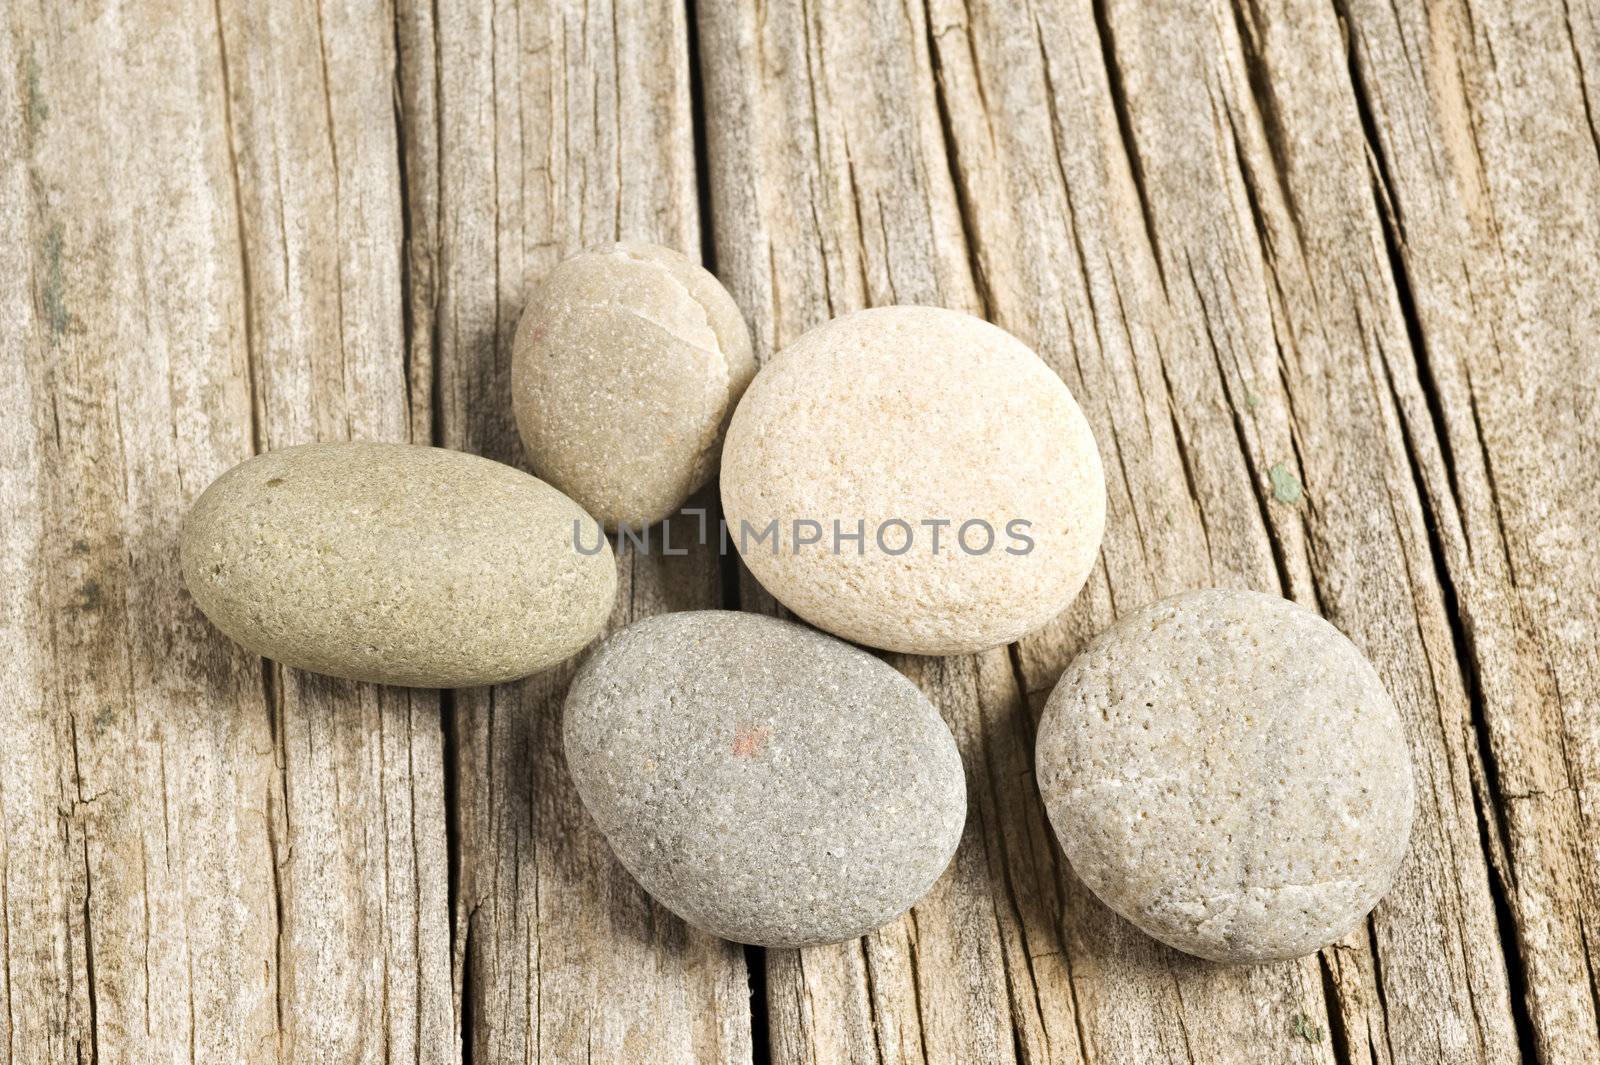 Stone and wood background